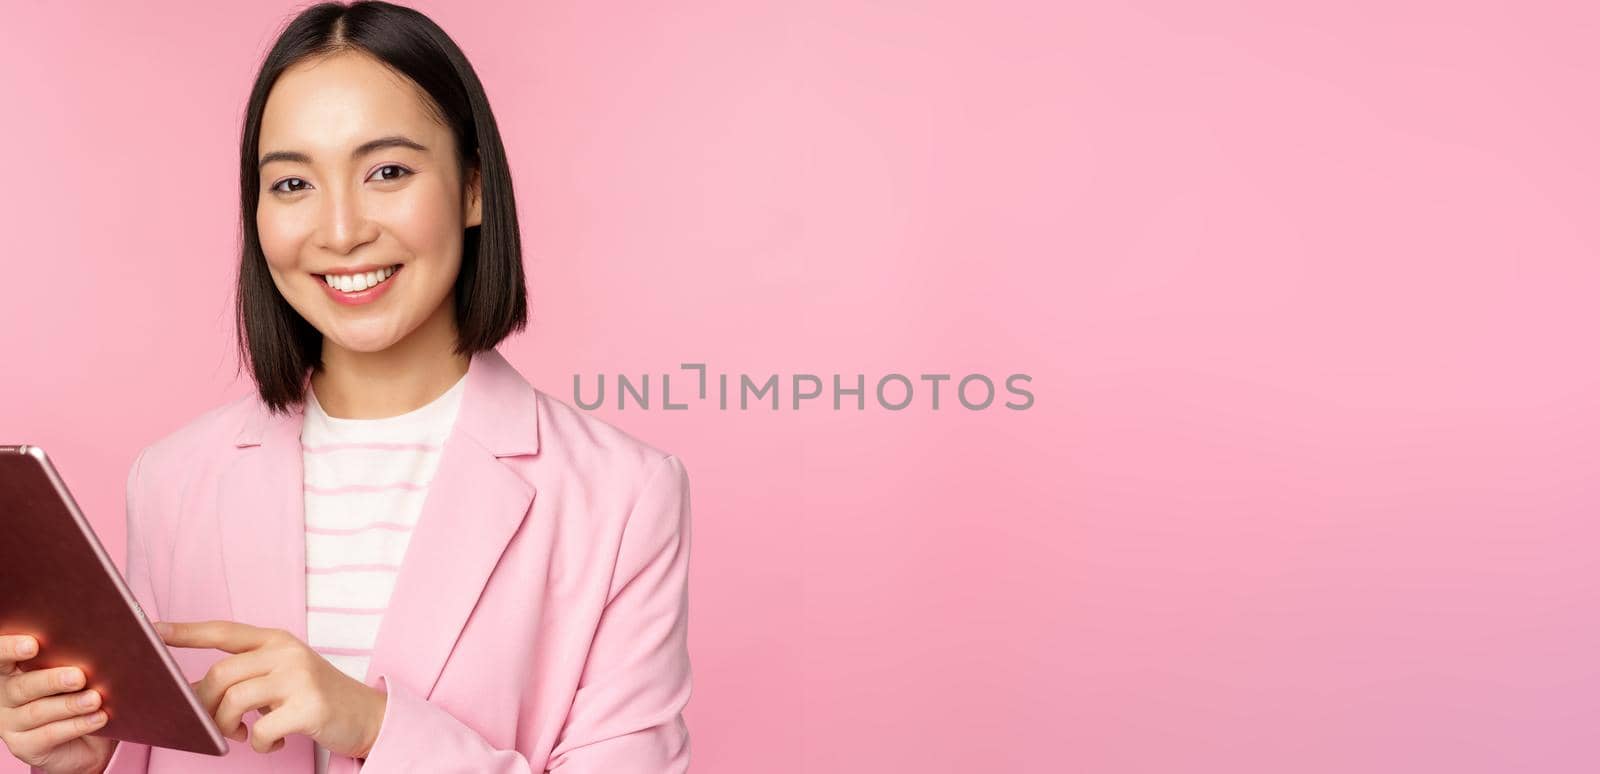 Portrait of young asian corporate woman, office lady with digital tablet, wearing suit, smiling and looking professional, posing against pink background.